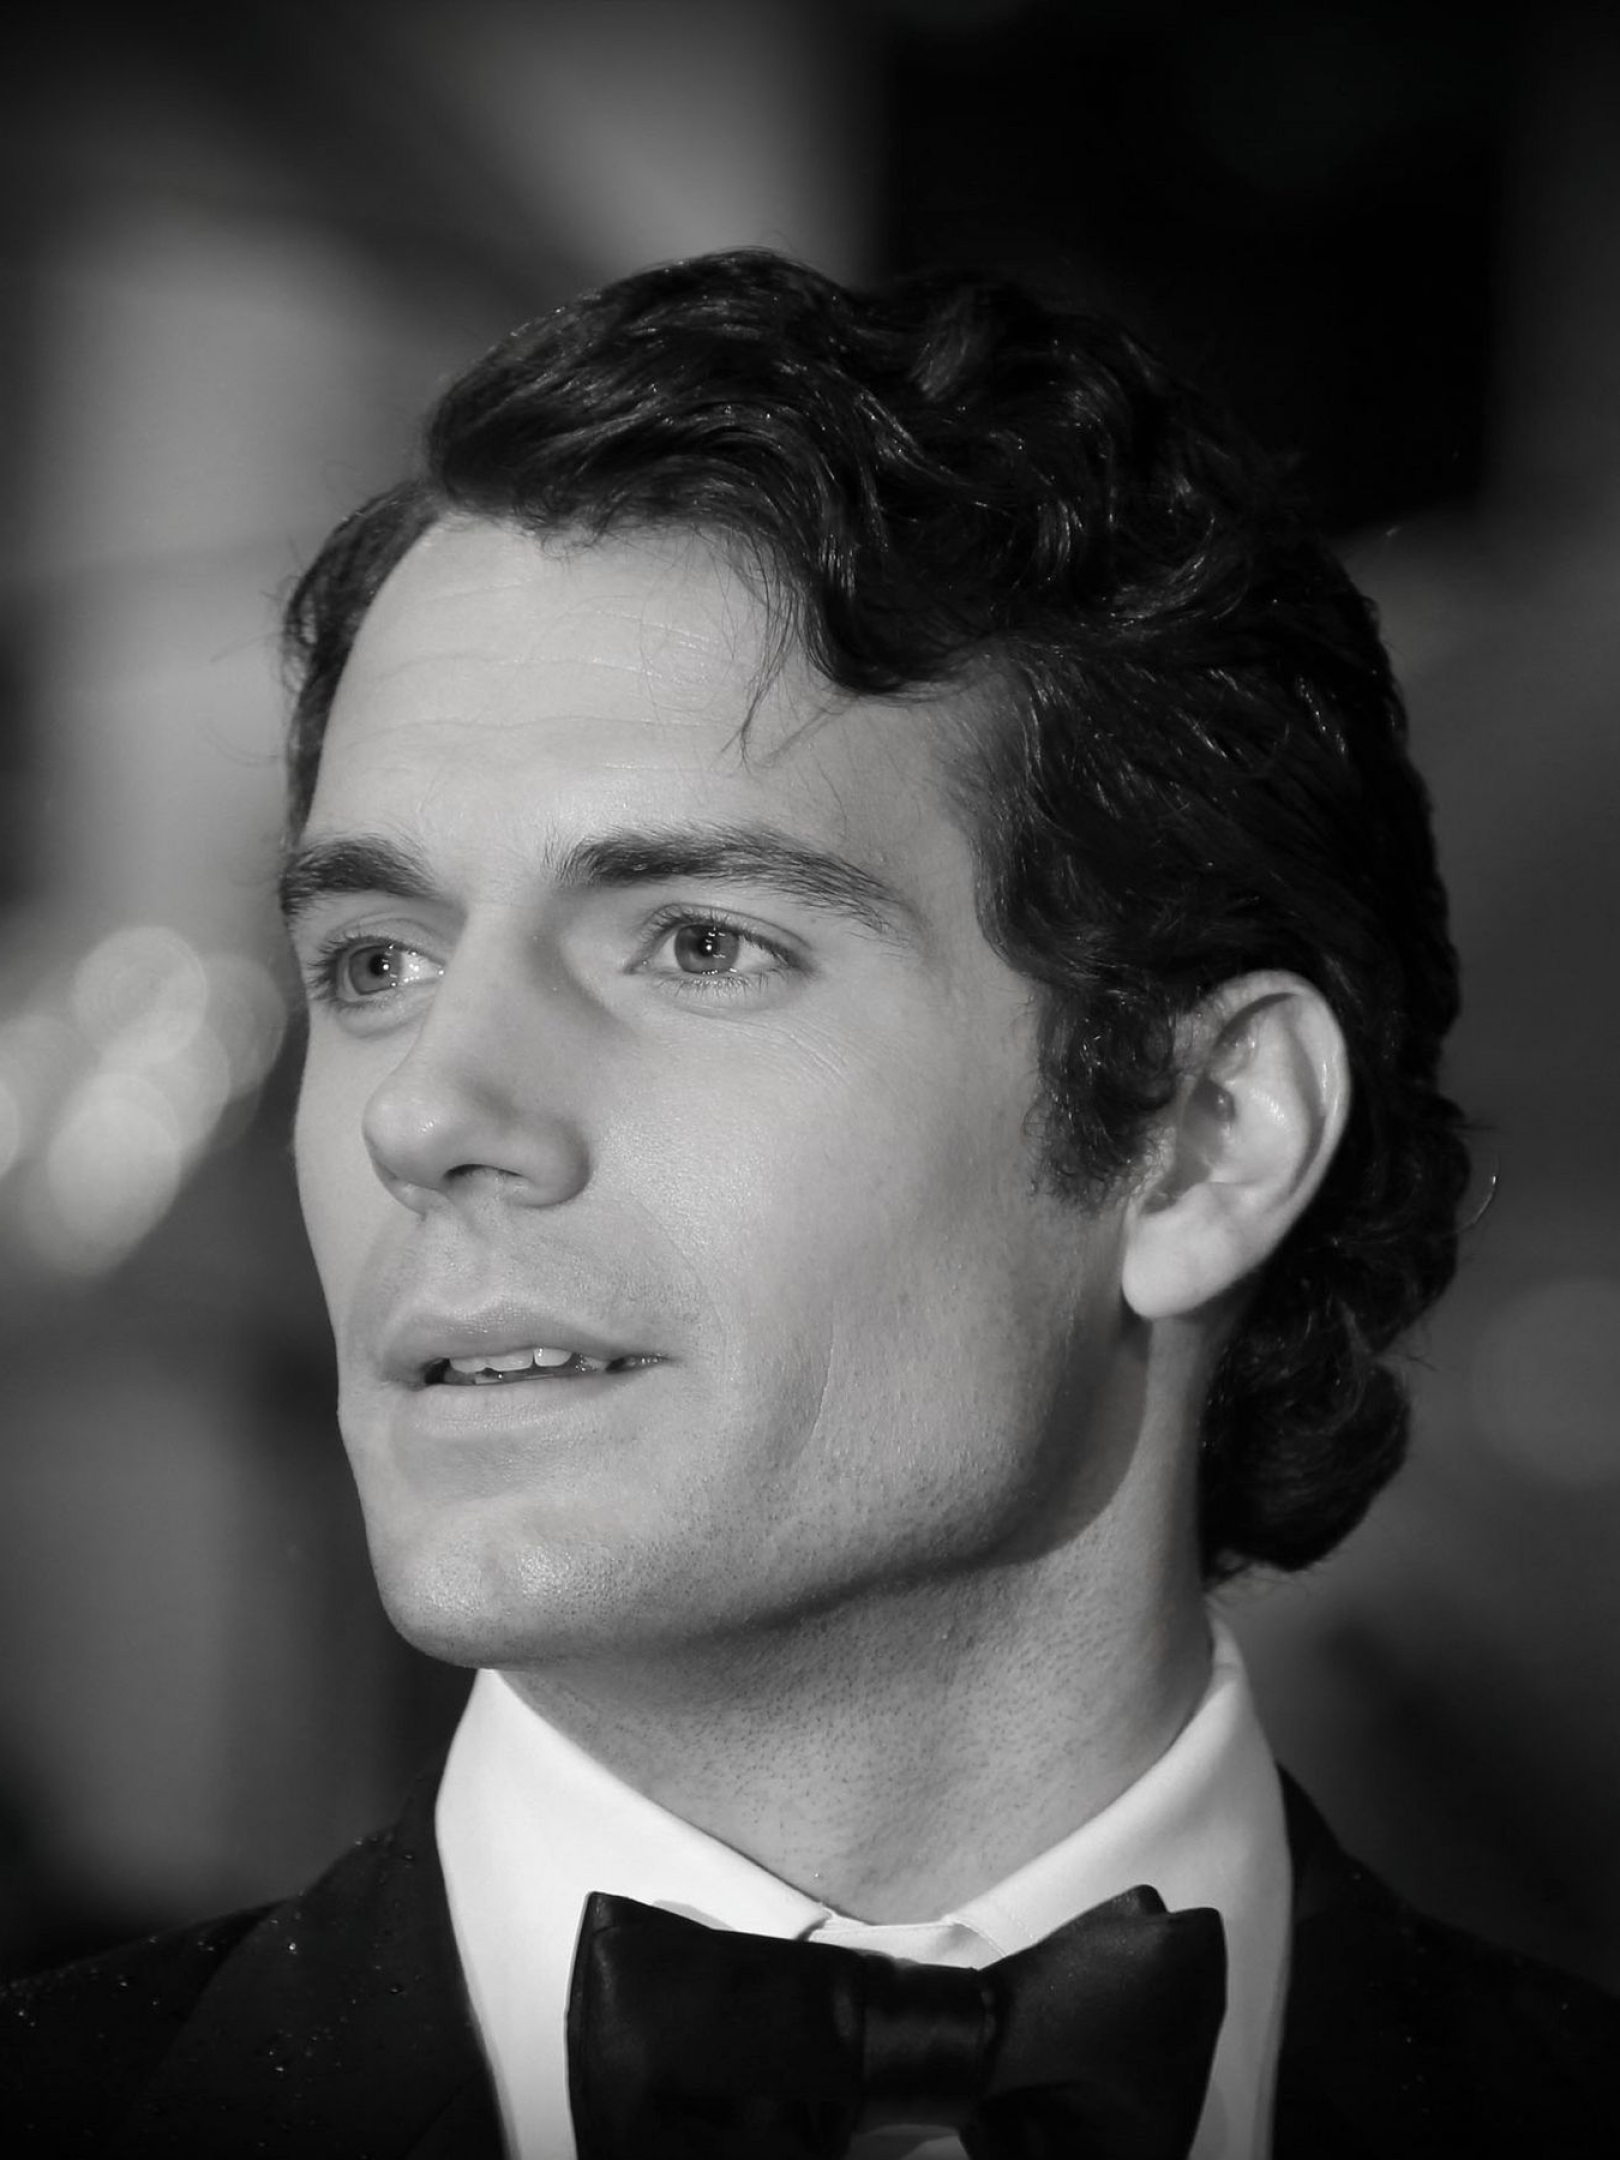 1620x2160 Resolution Henry Cavill Black Suit Images 1620x2160 ...